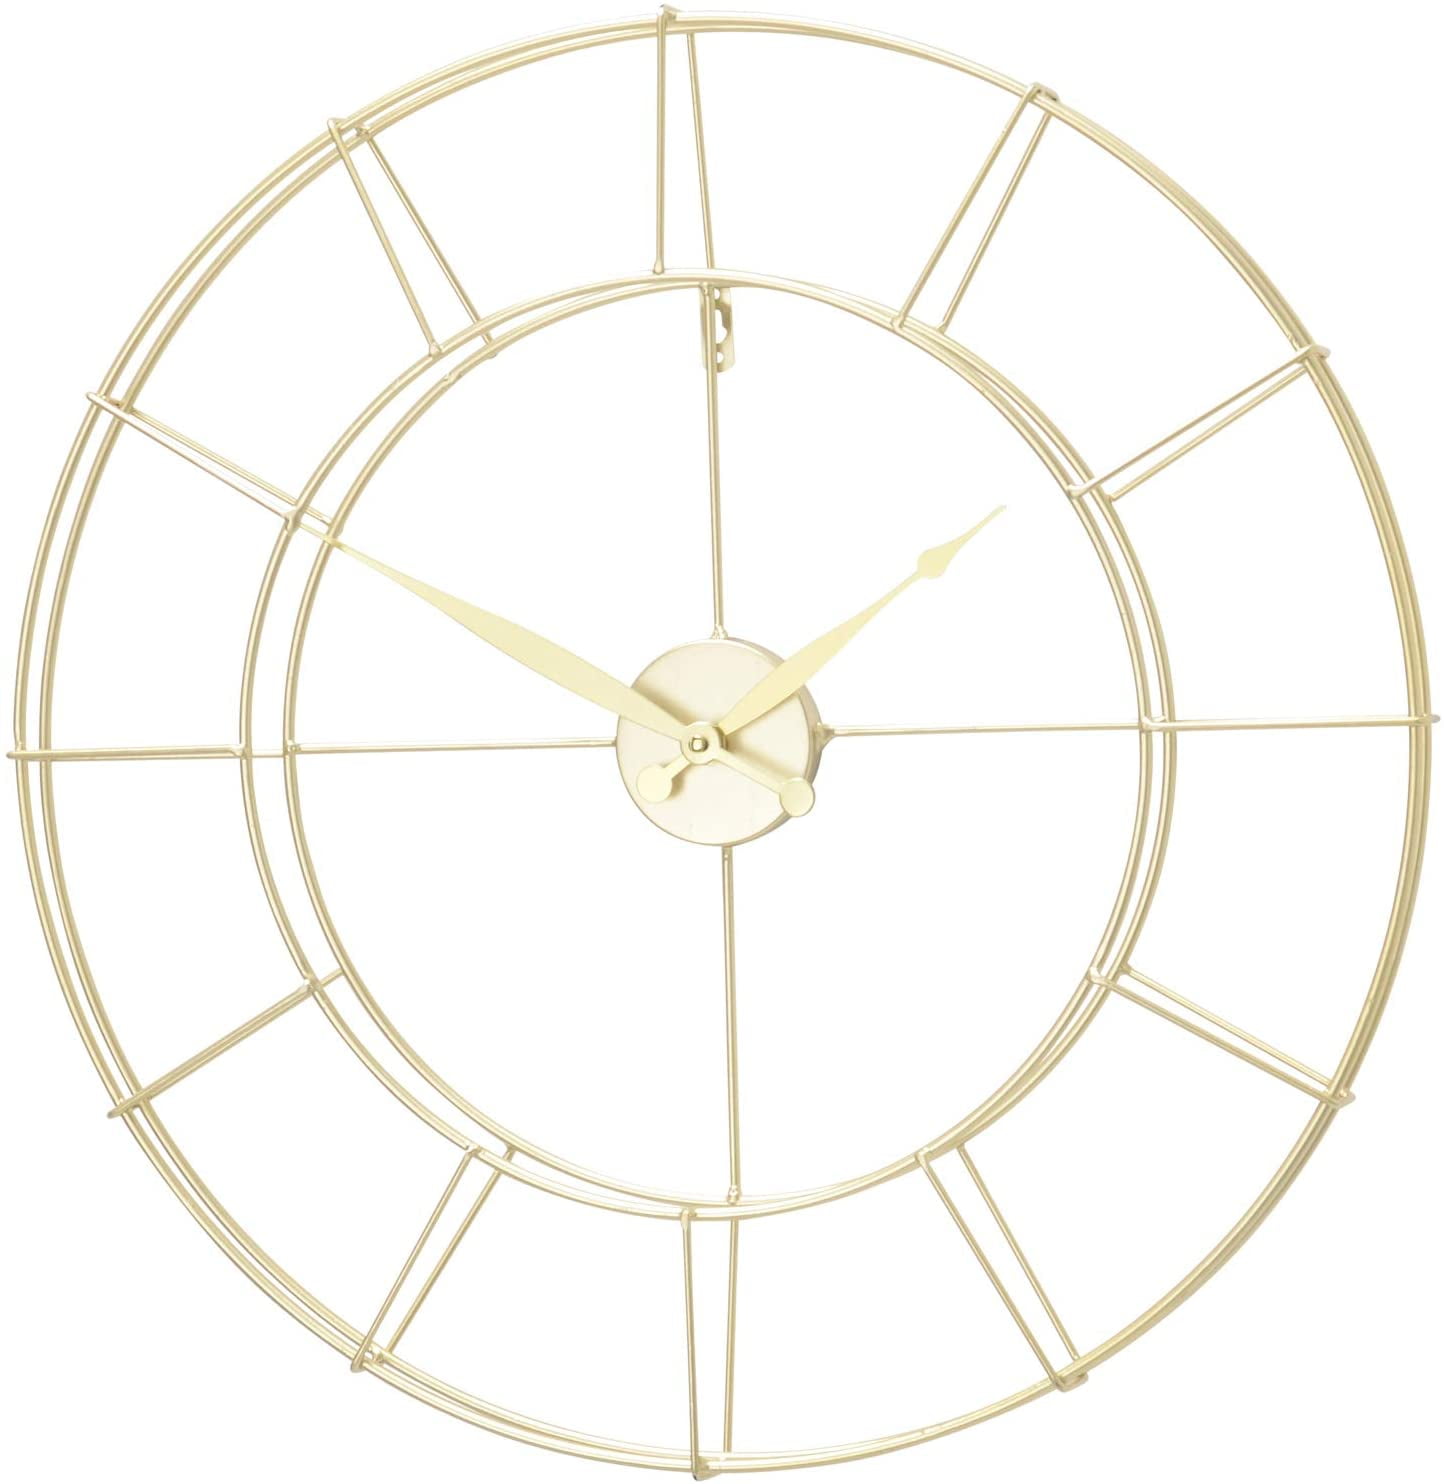 WHW Whole House Worlds Timekeeper Art Clock 22.5 D x 0.5 H Inches 1 AA Battery Quartz Movement 3.25 lbs. Mid-Century Modern Glam Not Included Gold Metal Work